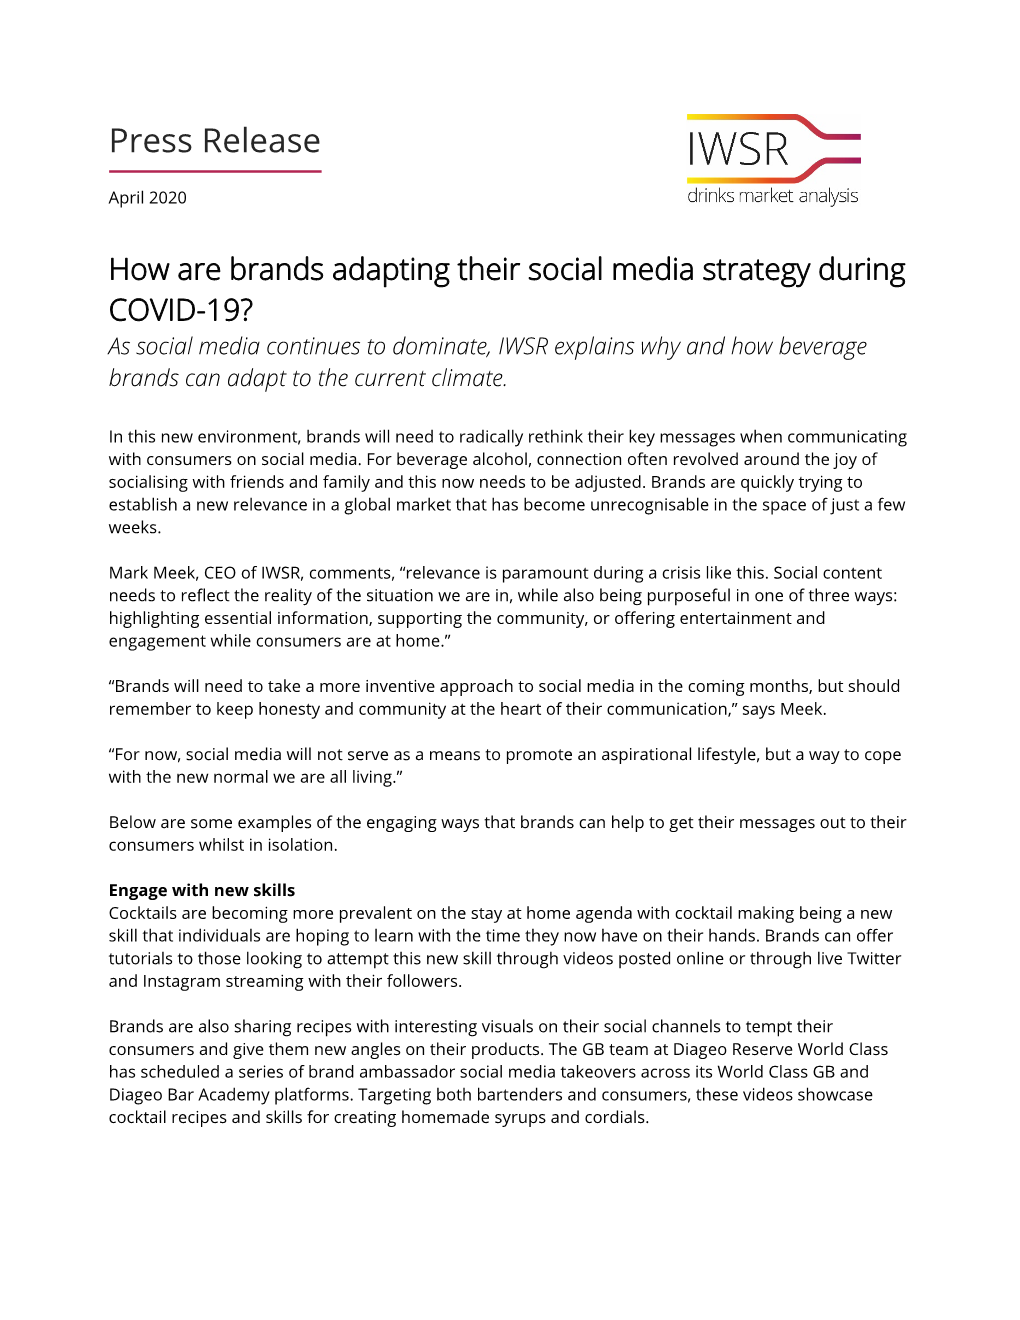 How Are Brands Adapting Their Social Media Strategy During COVID-19?